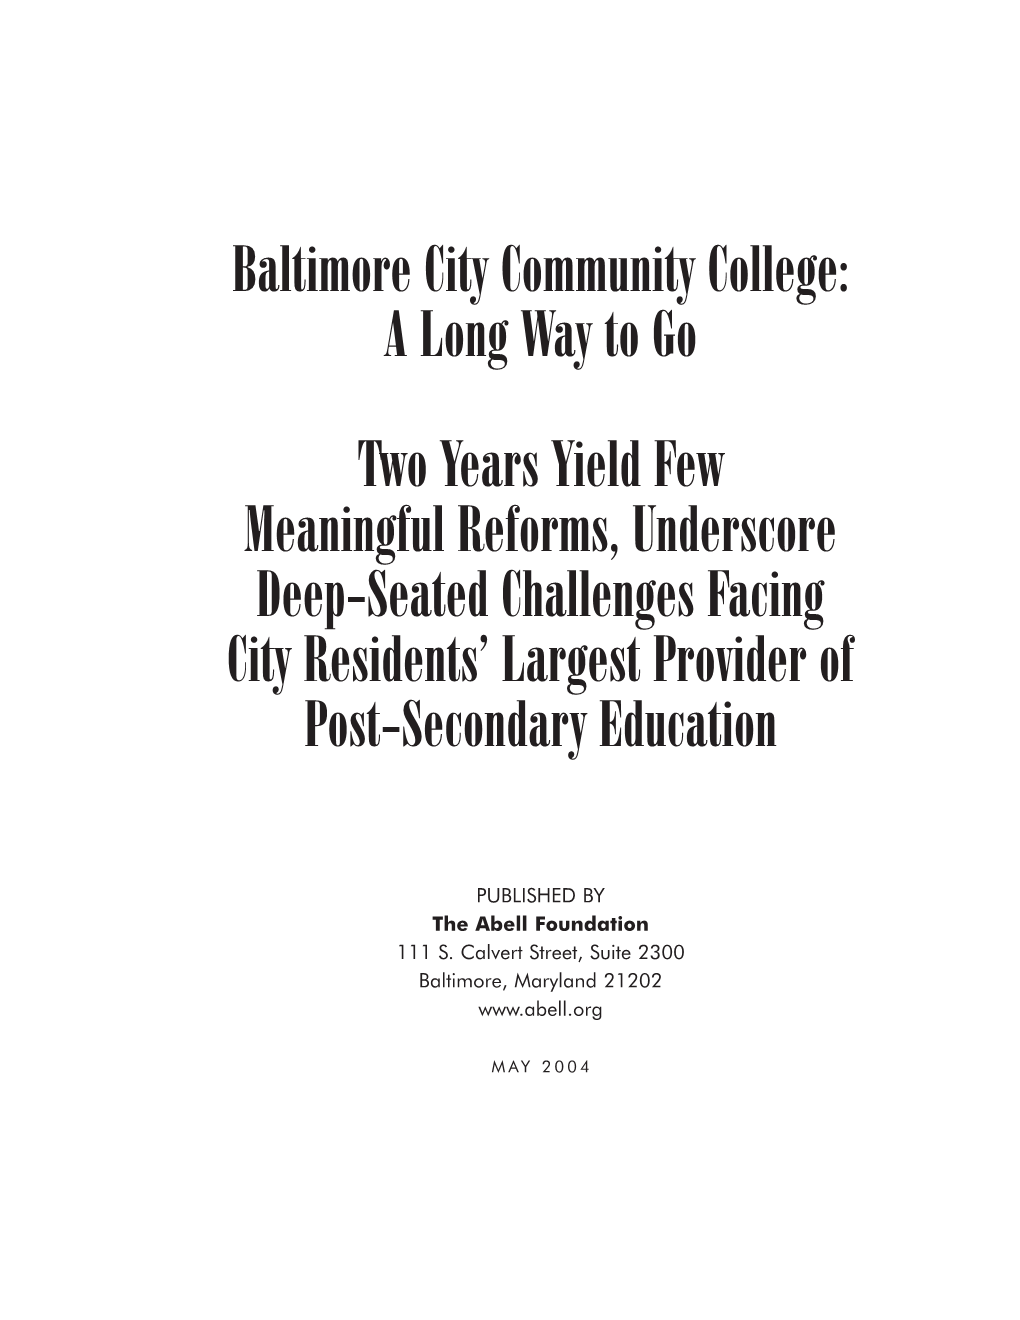 Baltimore City Community College: a Long Way to Go